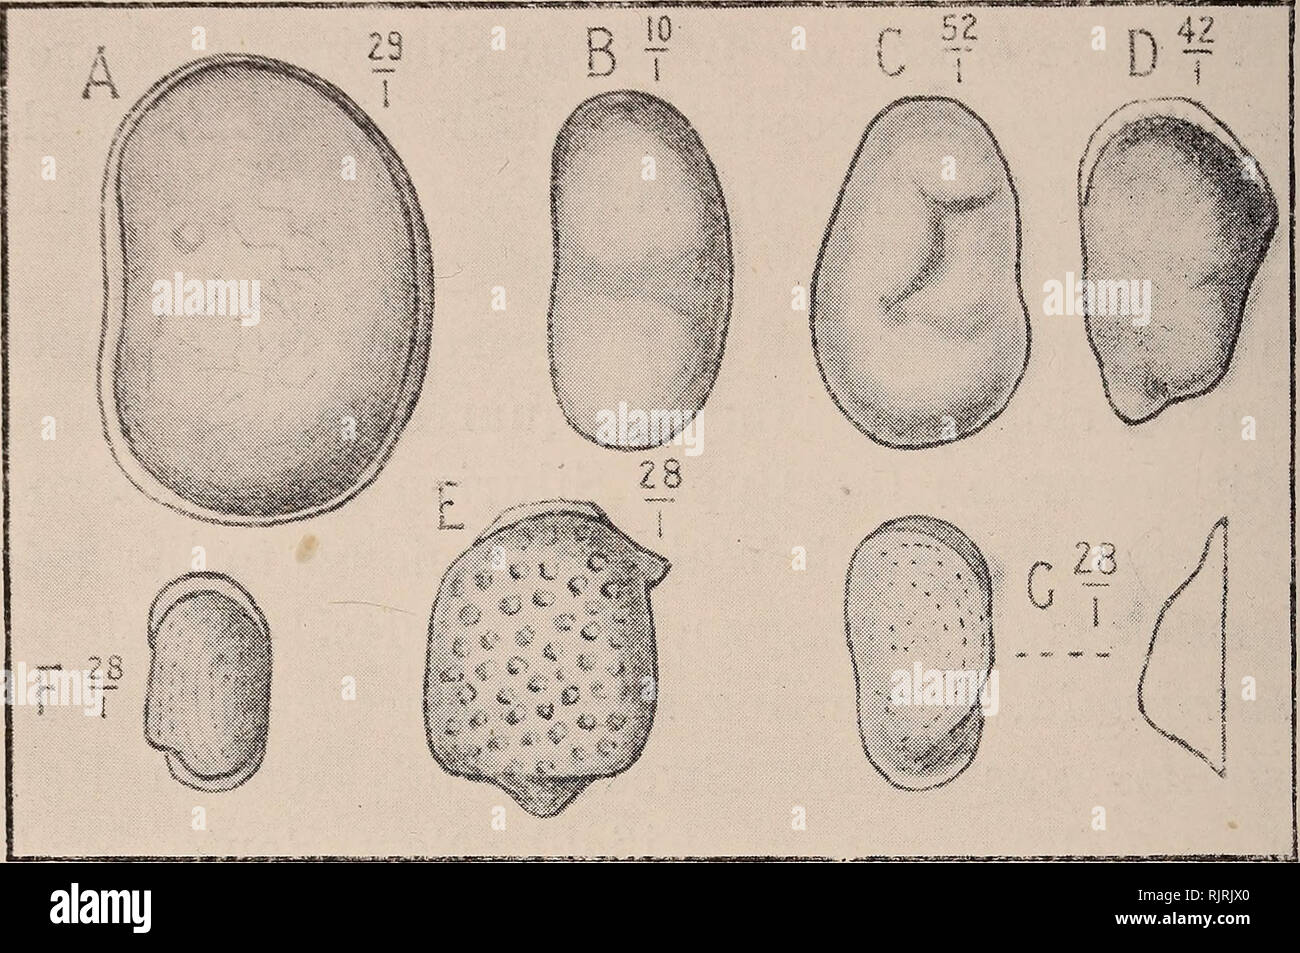 . Australasian fossils, a students' manual of palaeontology. Paleontology. 238 AUSTEALASIAN FOSSILS. Fig. 113-UPPER PALAEOZOIC and MESOZOIC OSTRACODA.. A—Primitia cuneus, Chapm. Mid. Devonian. Victoria B—Kntomis jonesi, de Kon. Carboniferous. New South Wales C—Synaphe mesozoica, Chapm sp. Triassic. New South Wales D—Cythere lobulata, Chapm. Jurassic. West Australia K—Paradoxorhyncha foveolata, Chapm. Jurassic. West Australia F—IyOxoconcha jurassica, Chapm. Jurassic. West Australia G—Cytheropteron australiense, Chapm. Jurassic. West Australia localities Leperditia prominens was also obtained. A Stock Photo